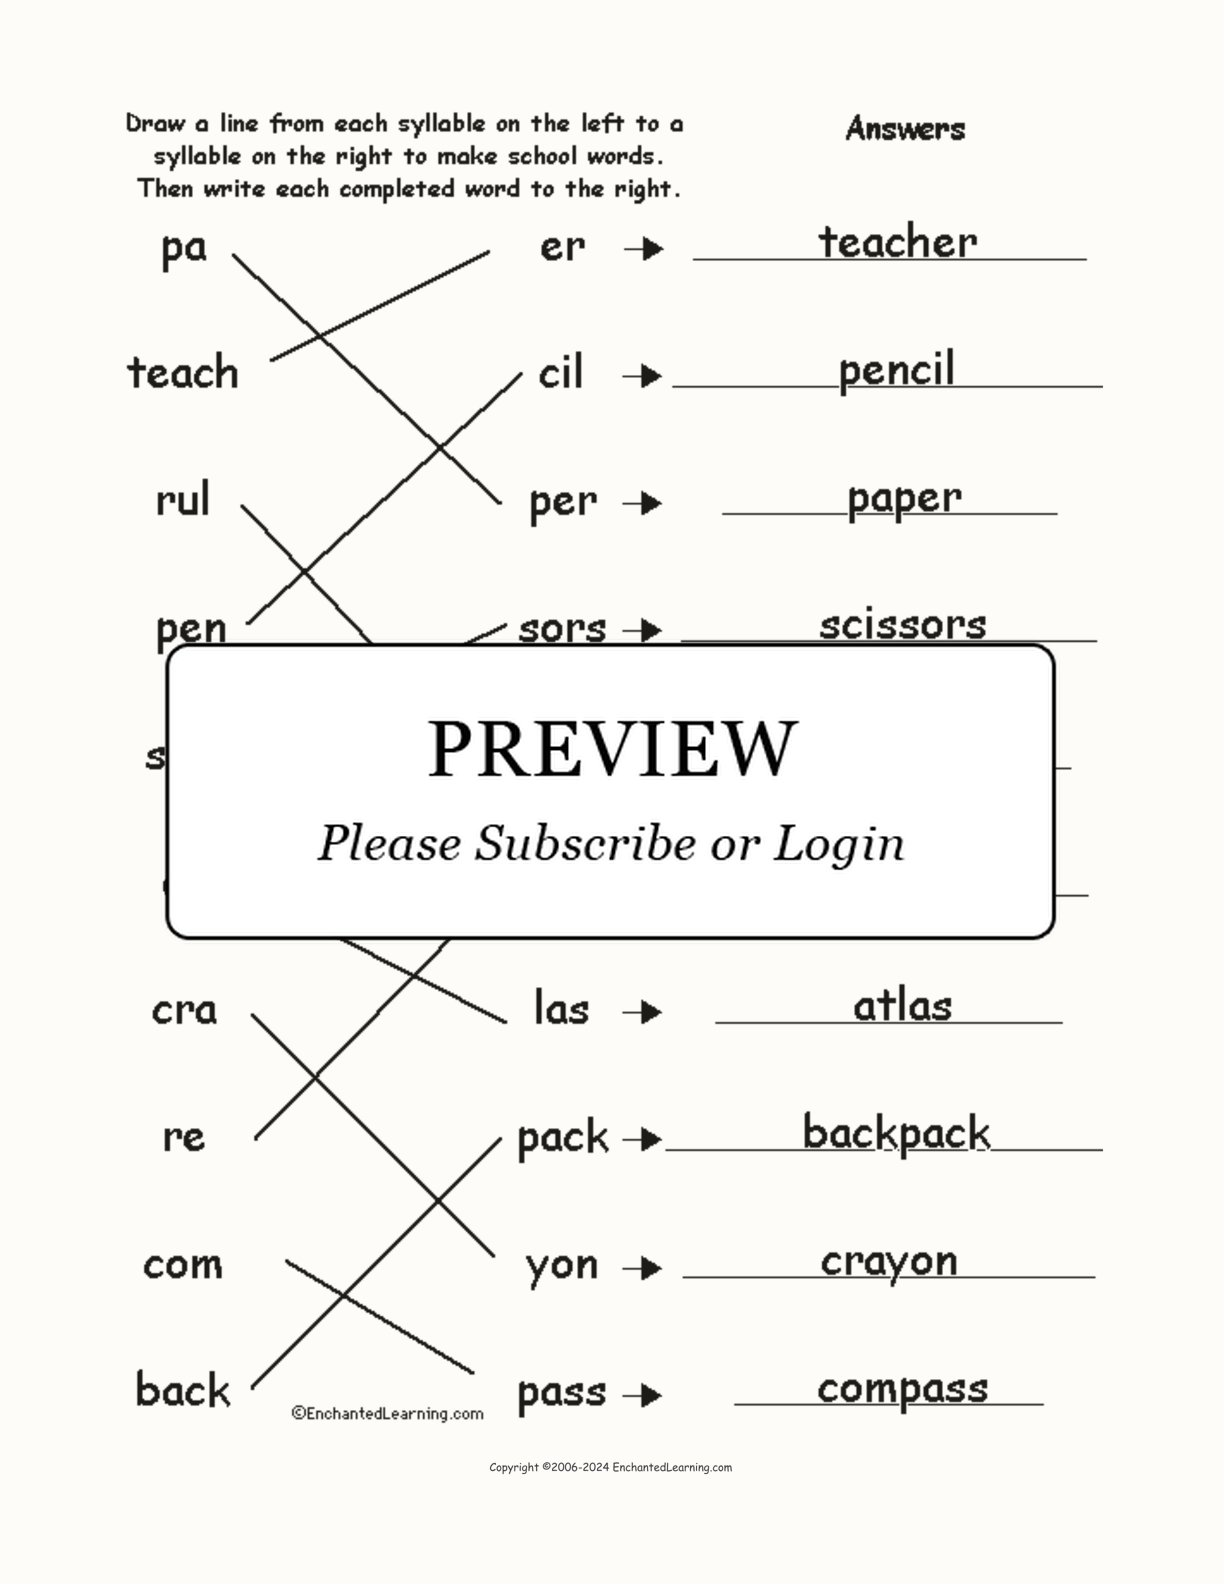 Match the Syllables: School Words interactive worksheet page 2